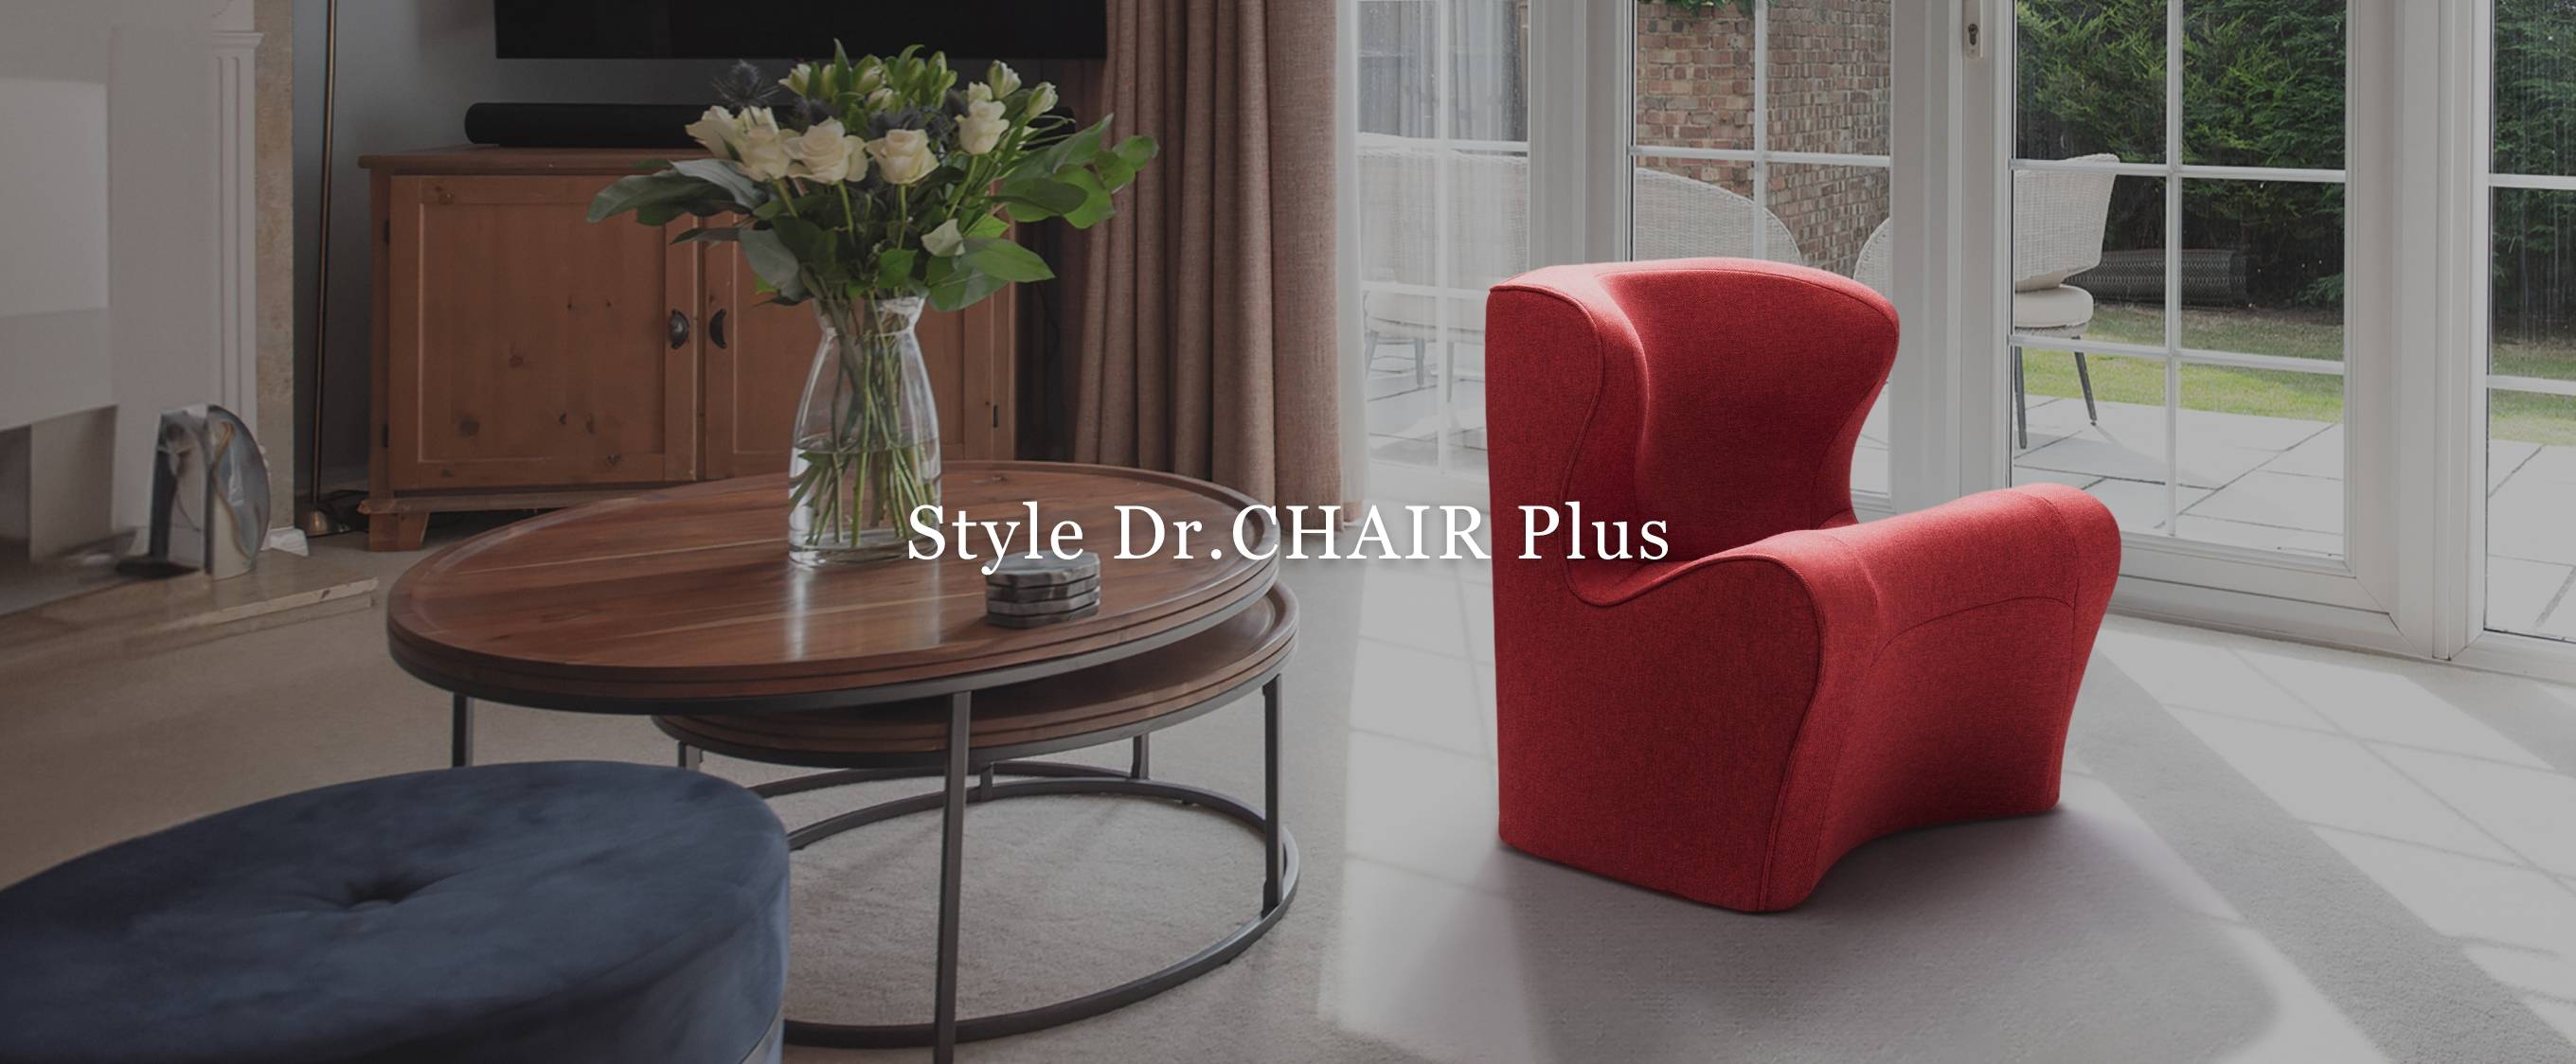 Style Dr.CHAIR Plus（スタイルドクターチェアプラス） | Style 